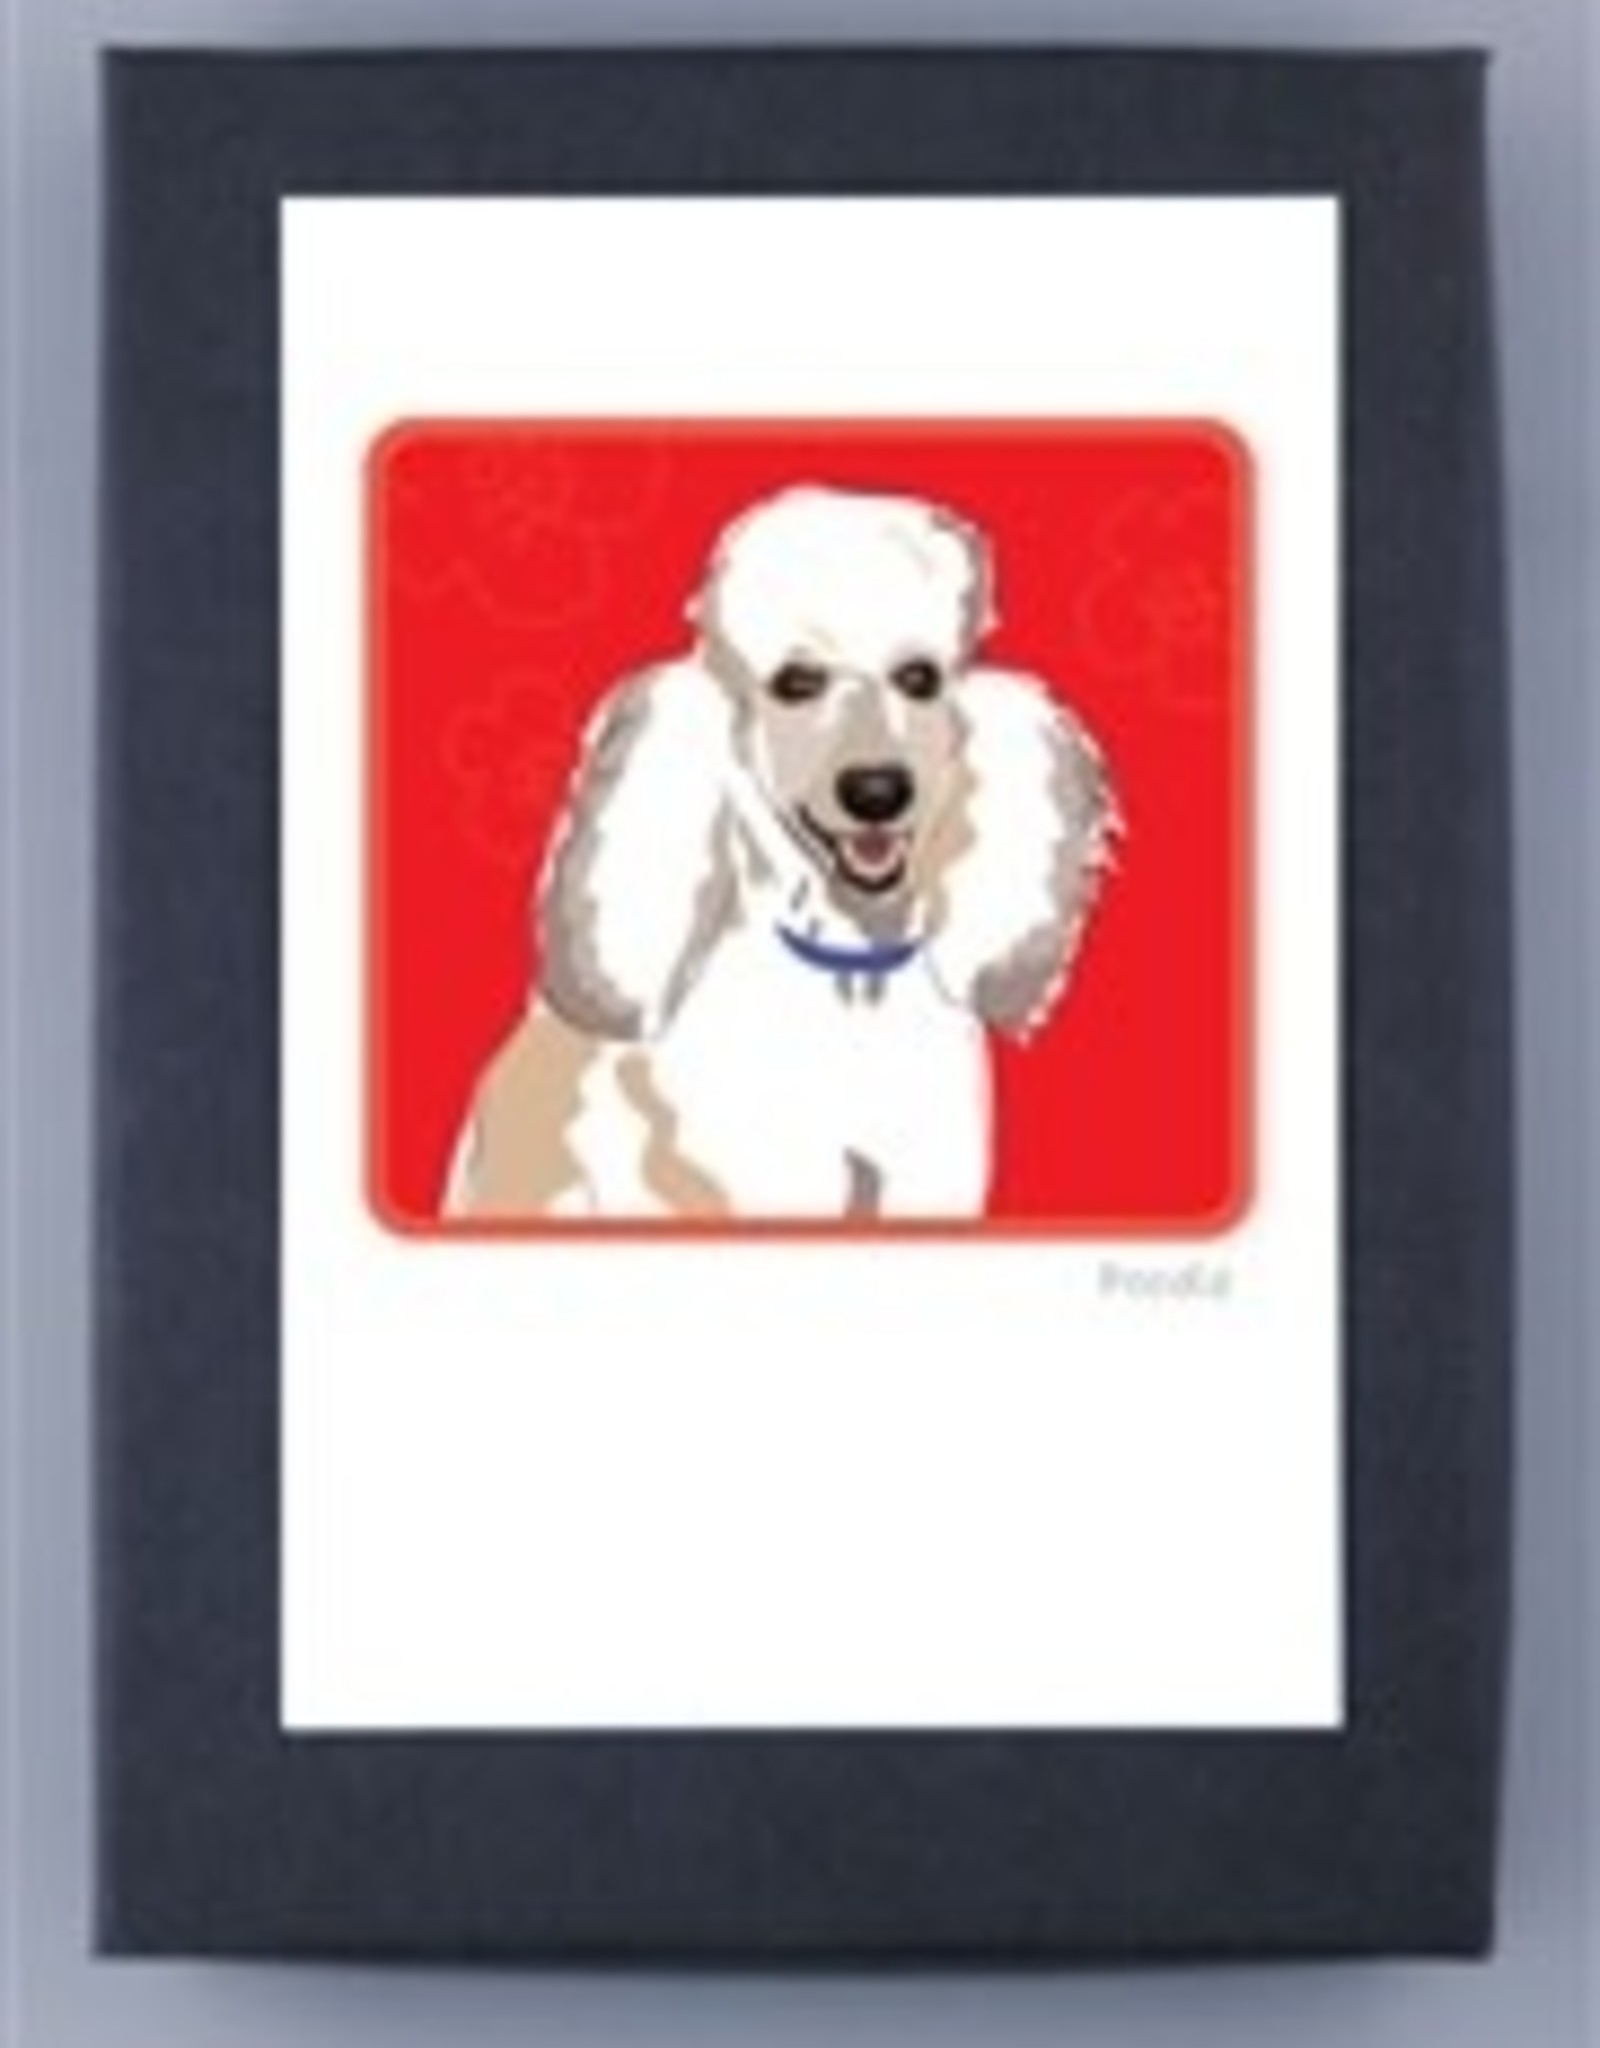 Paper Russells Poodle White-2